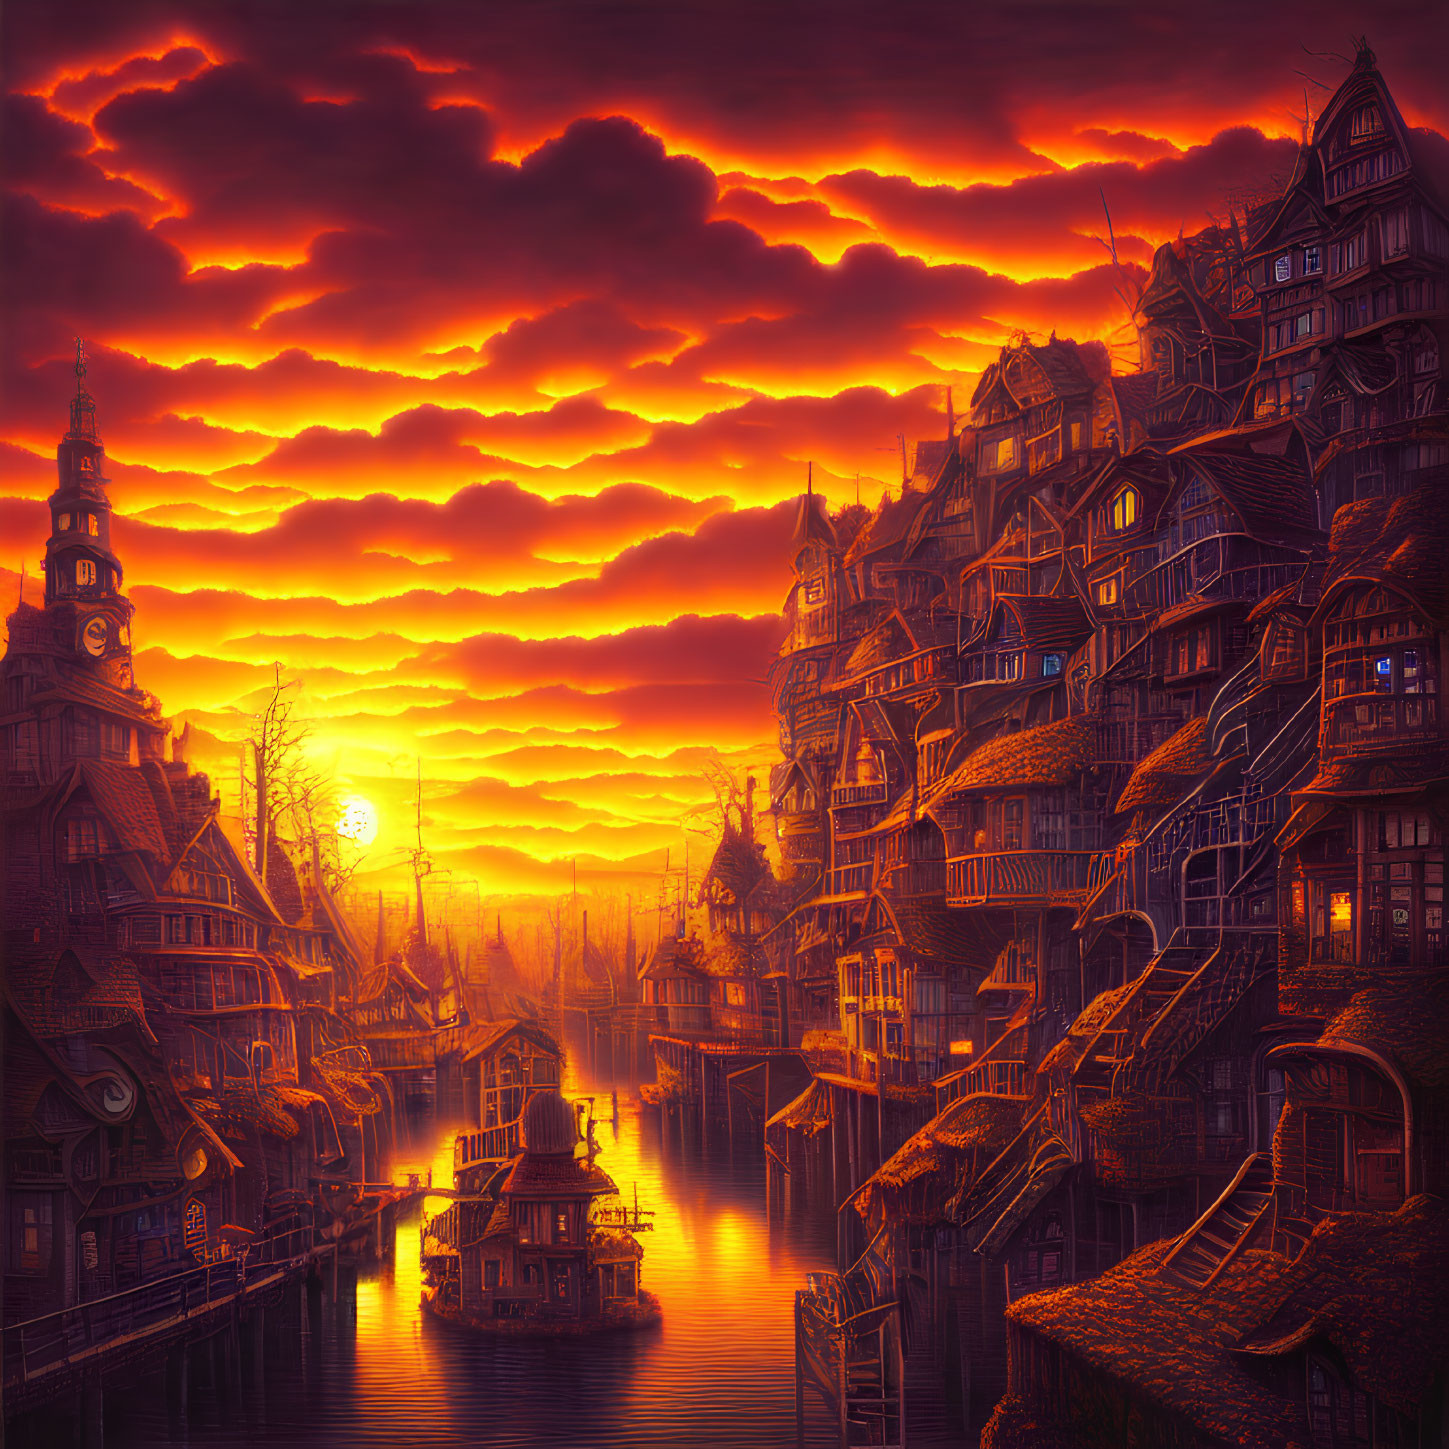 Vibrant sunset over fantasy town with river and ornate buildings